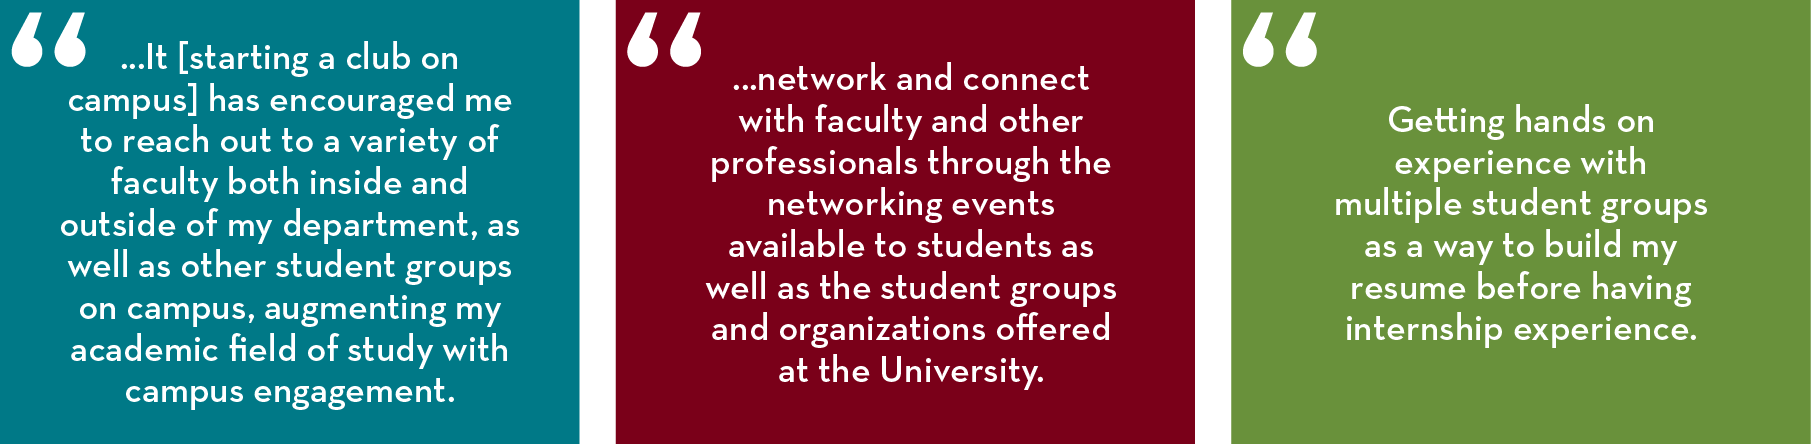 “... It [starting a club on campus] has encouraged me to reach out to a variety of faculty both inside and outside of my department, as well as other student groups on campus, augmenting my academic field of study with campus engagement.” “...network and 